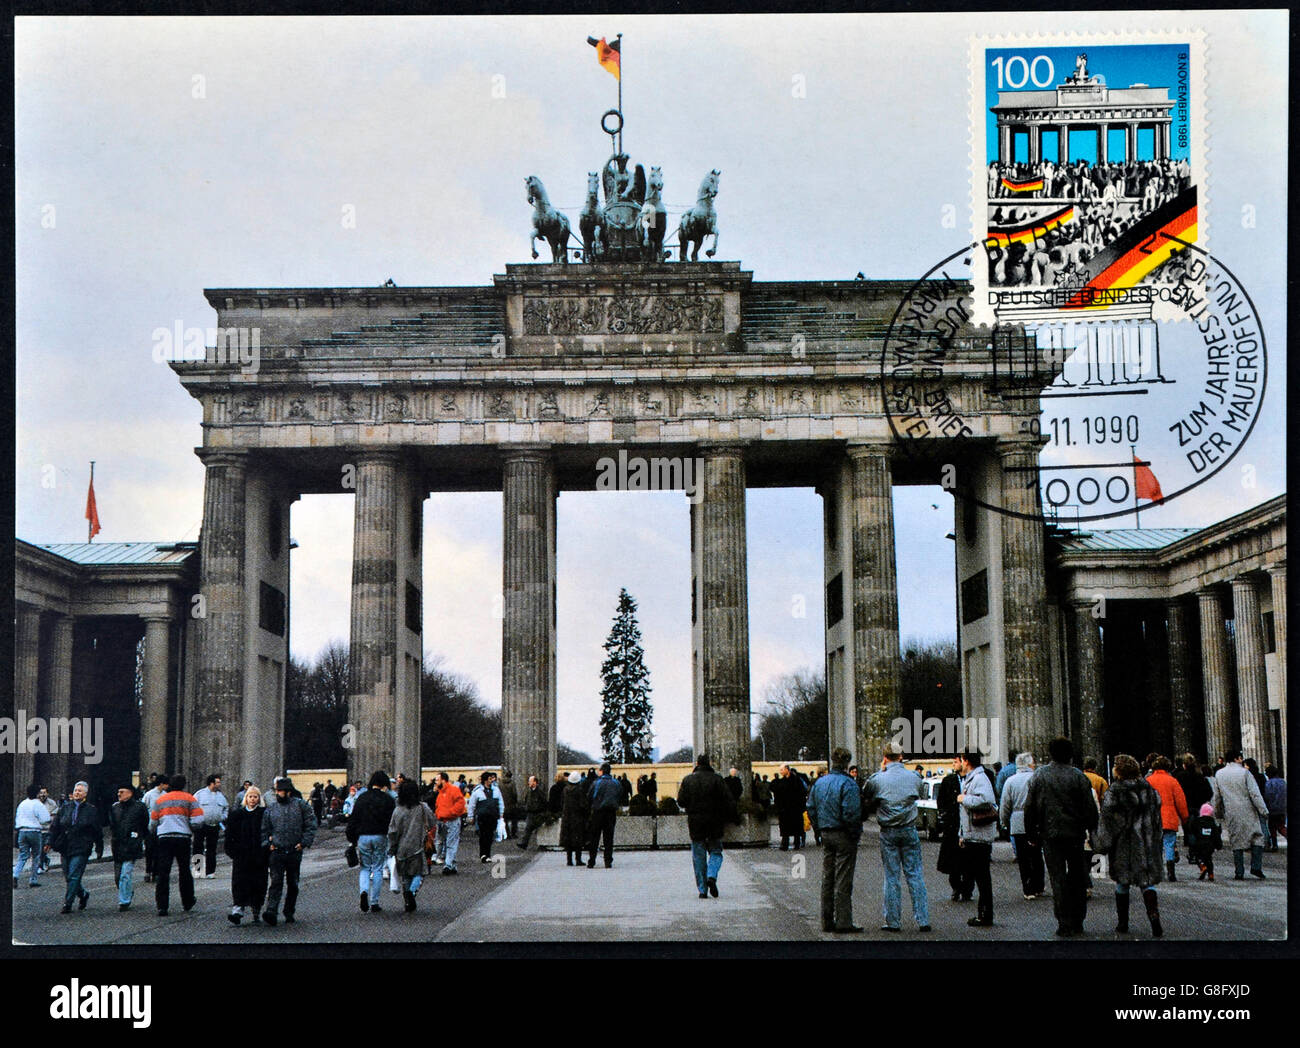 GERMANY - CIRCA 1990: A postcard printed in Germany commemorates the fall of the Berlin Wall on November 9, 1989, shows brandenb Stock Photo